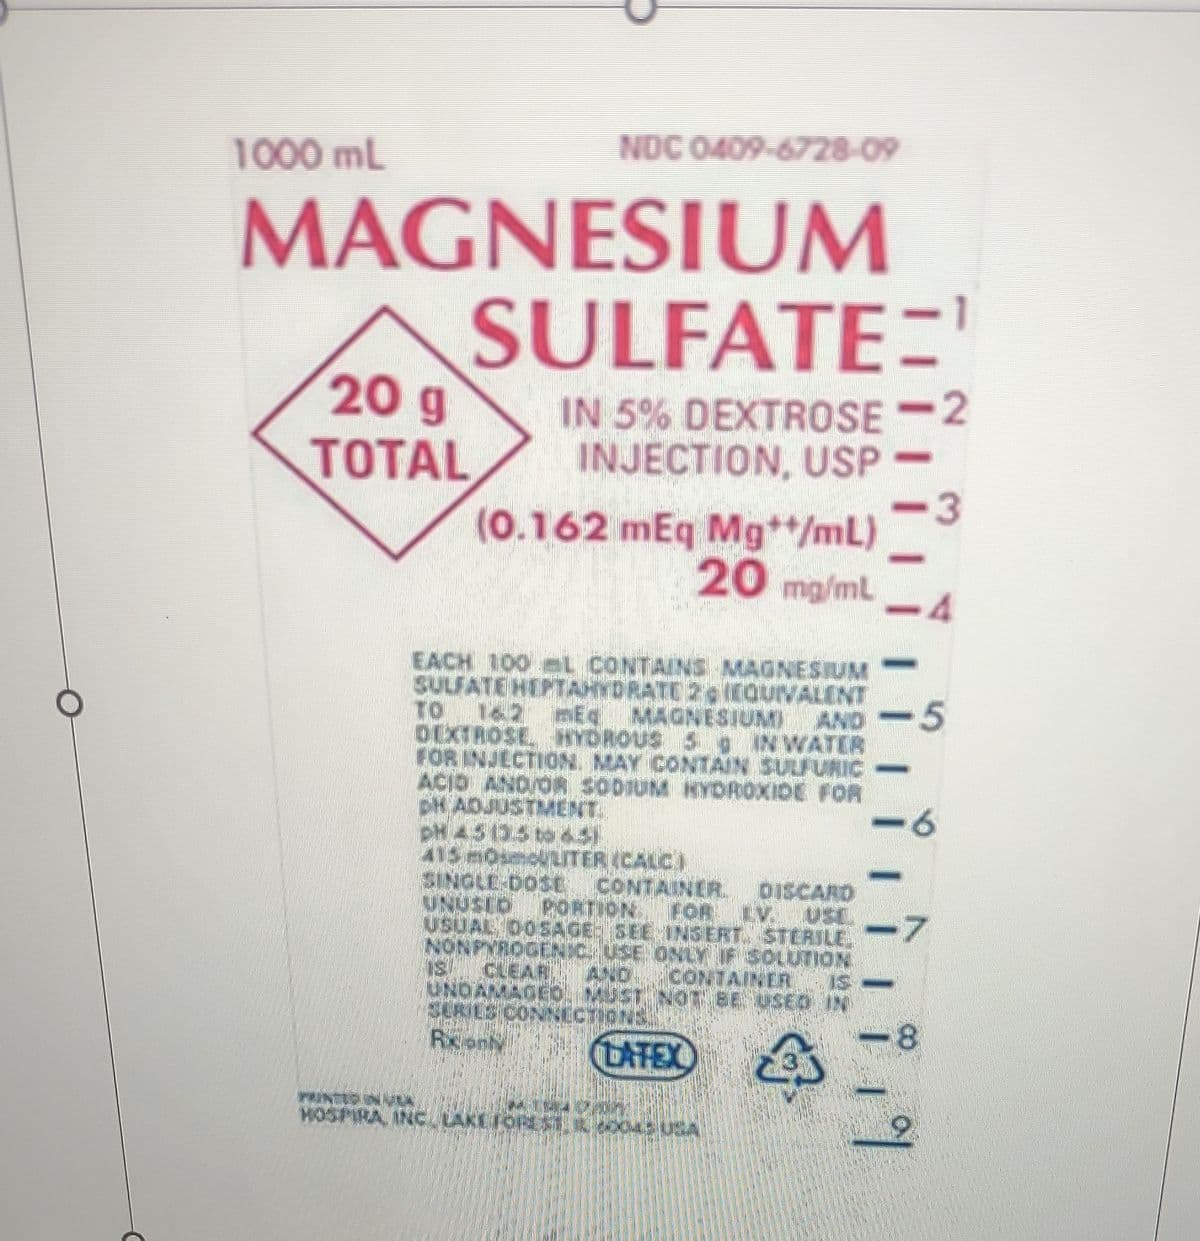 C
1000 mL
MAGNESIUM
SULFATE=¹
IN 5% DEXTROSE 2
INJECTION, USP
20 g
TOTAL
NDC 0409-6728-09
(0.162 mEq Mg**/mL)
20 mg/ml
EACH 100 L CONTAINS MAGNESIUM
SULFATE HEPTAHYDRATE 2 EQUIVALENT
TO 162 mEq MAGNESIUM AND
DEXTROSE HYDROUS 5 IN WATER
FOR INJECTION MAY CONTAIN SULFURIC
ACID AND OR SODIUM HYDROXIDE FOR
DH ADJUSTMENT
PH 45 135 to 451
415 MOLECULITER (CALC)
SINGLE-DOSE CONTAINER
UNUSID PORTION FOR LV.
DISCARD
USL
USUAL DOSAGE: SEE INSERT. STERILE.
NONPYROGENIC, USE ONLY IF SOLUTION
IS CLEAR AND CONTAINER
NOT BE USED
43
UNDAMAGE
SERIES CON
Rxon
Penzio
MOSPIRAL INC LAKEFON
ONS.
DATEX
13
-7
16! !
3
5